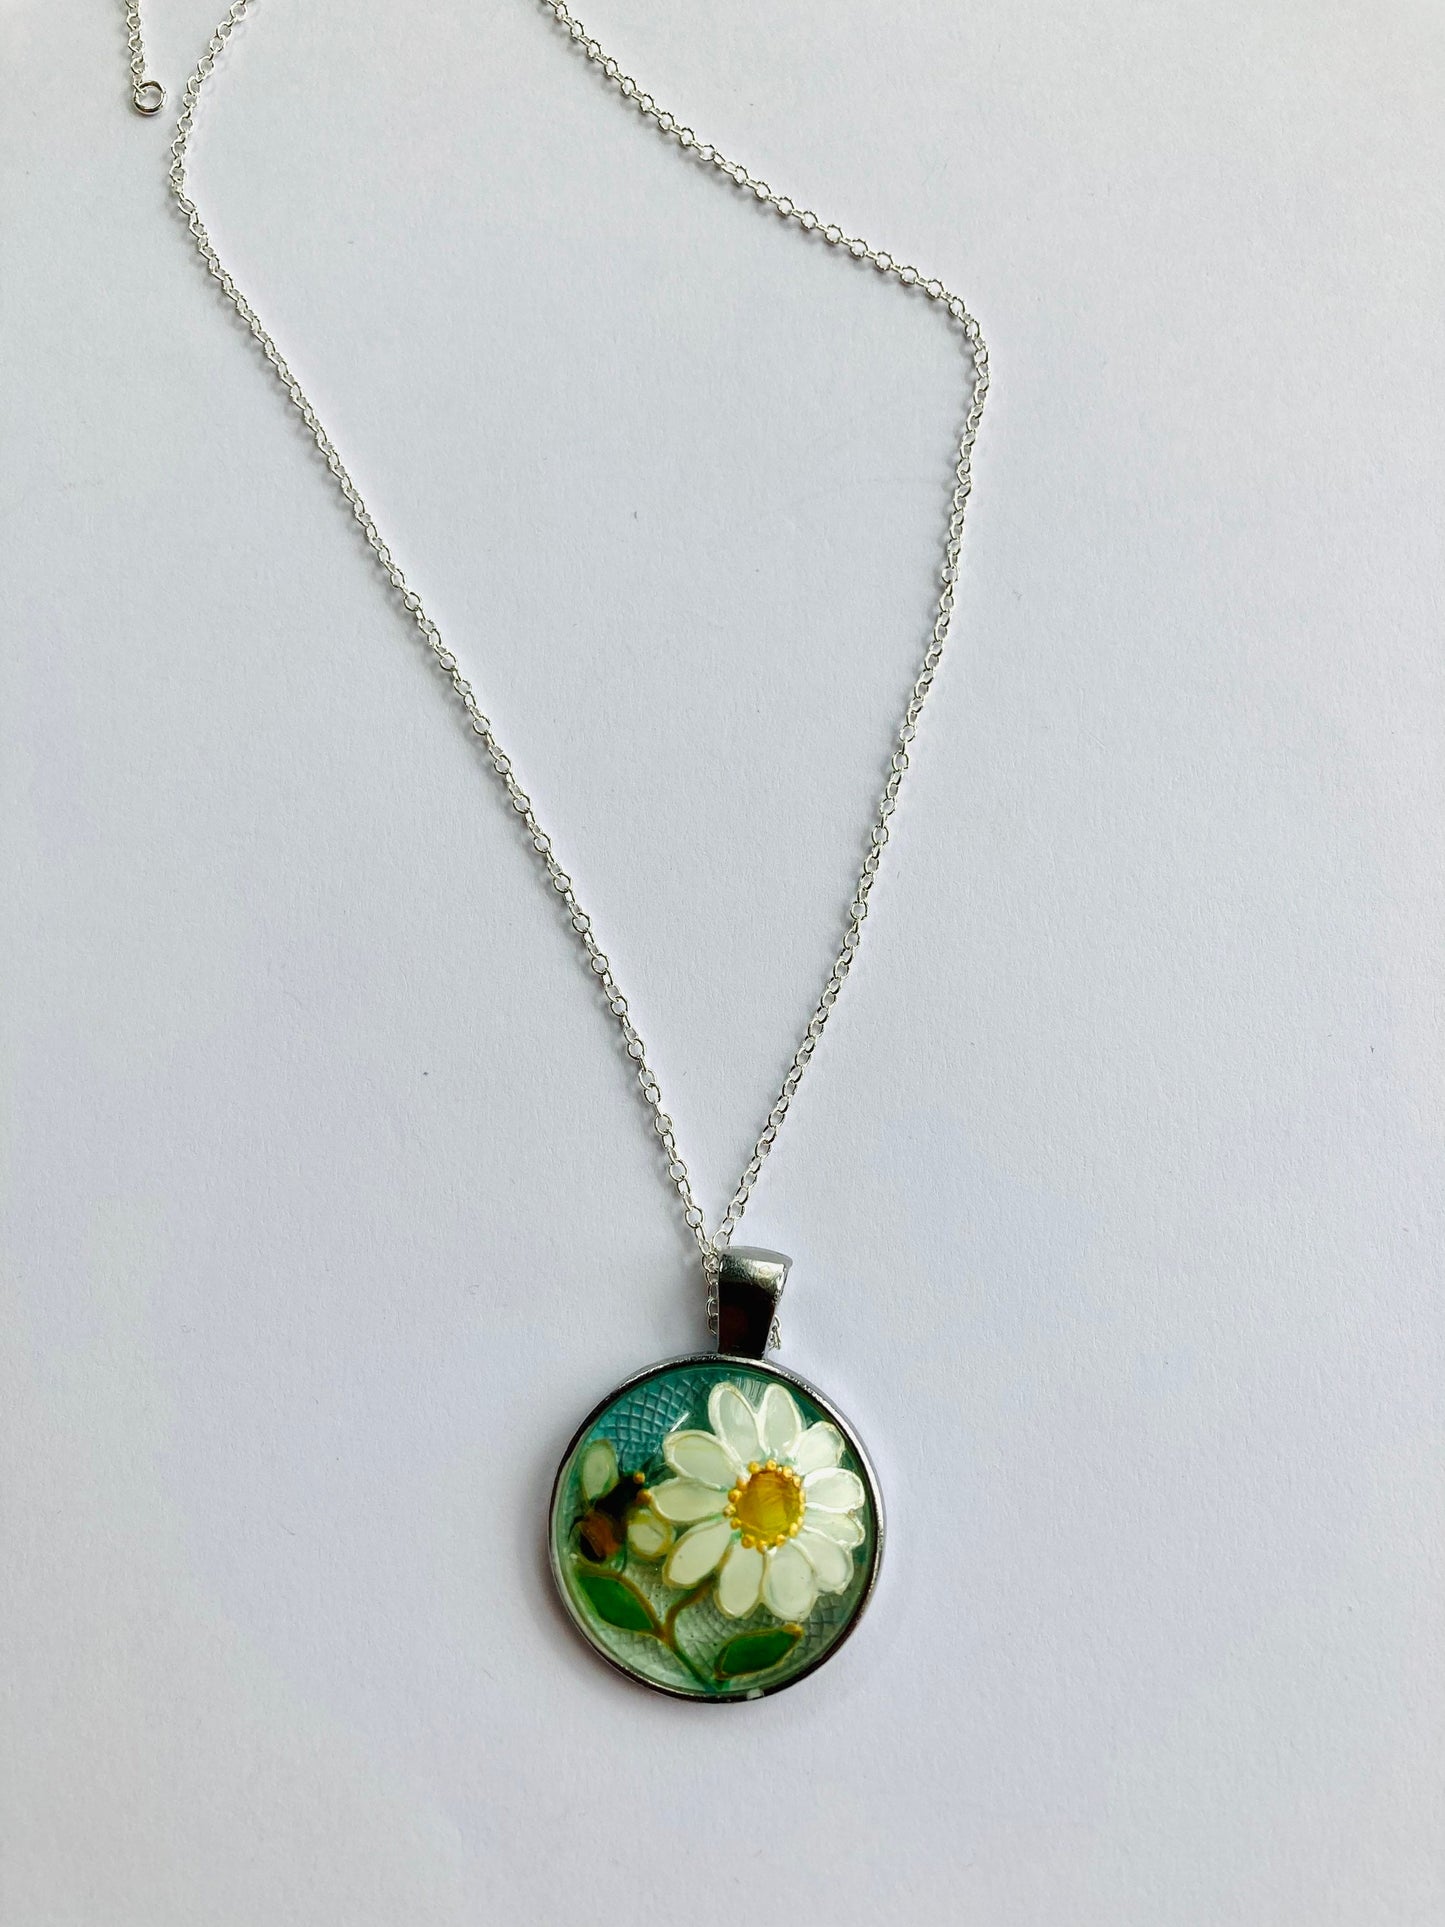 Daisy and Bee design hand painted glass pendant necklace